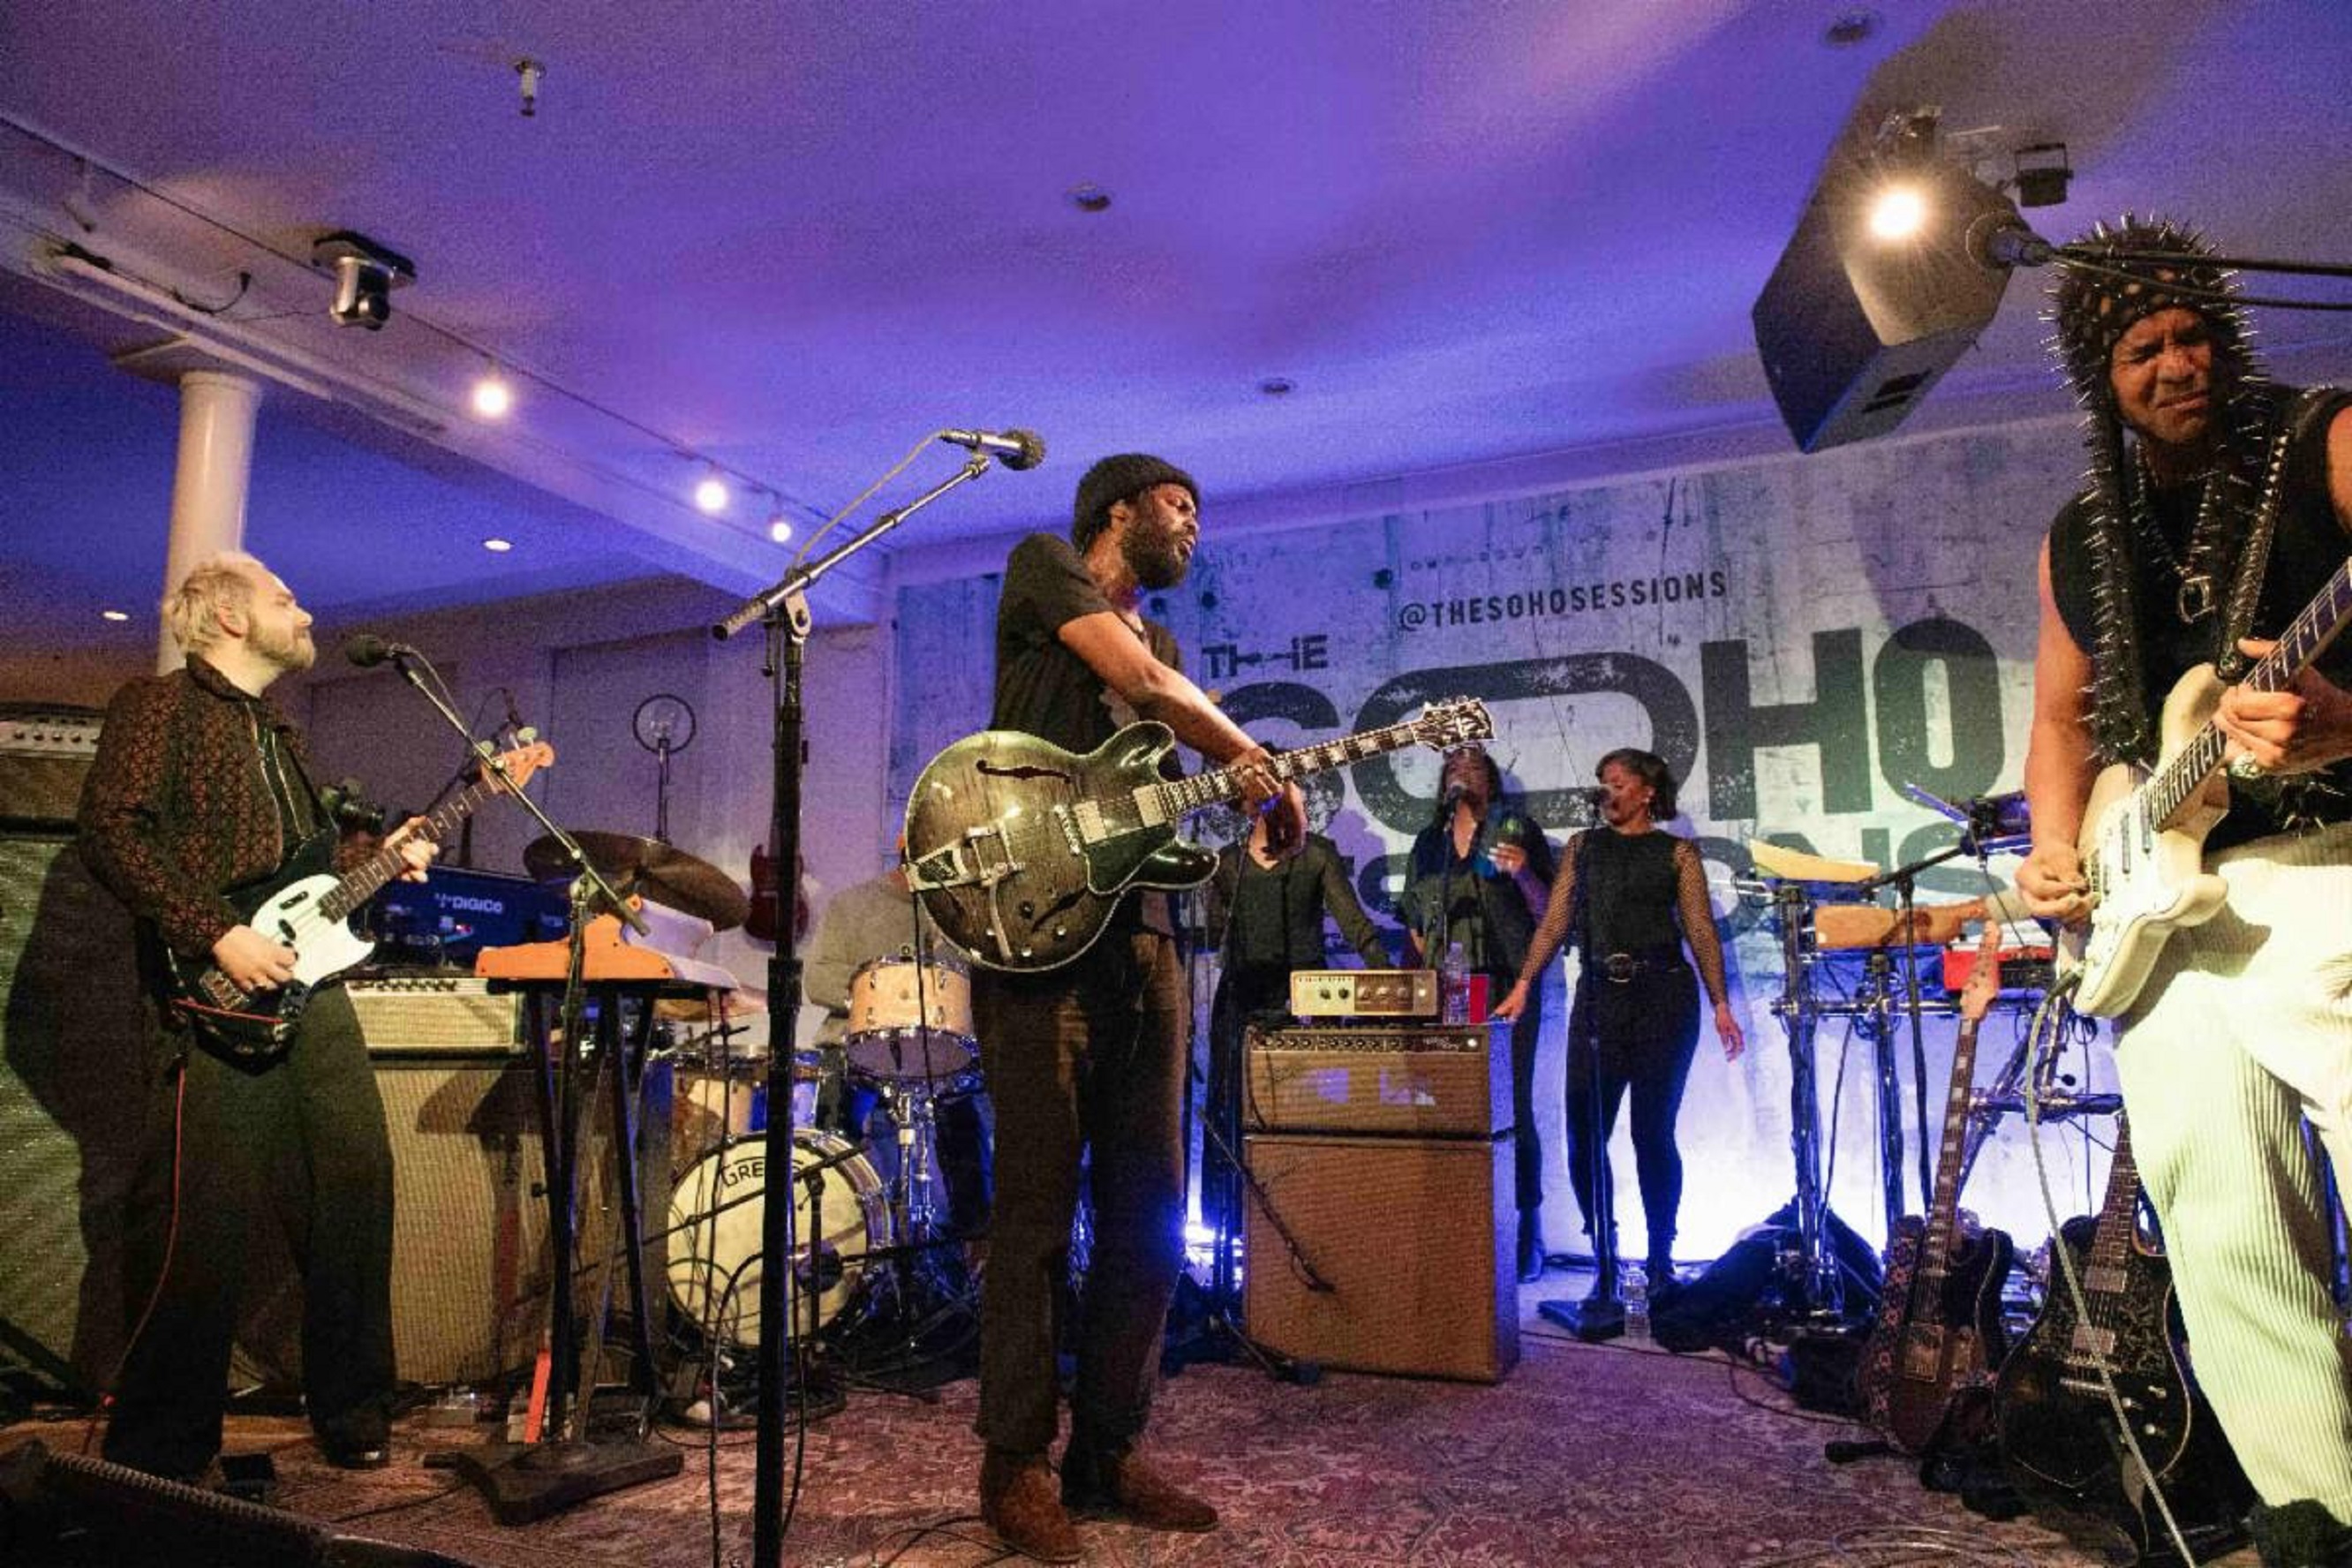 Gary Clark Jr. Lights Up NYC with Personal and Electrifying Soho Sessions Performance Celebrating ‘JPEG RAW’ Album Release